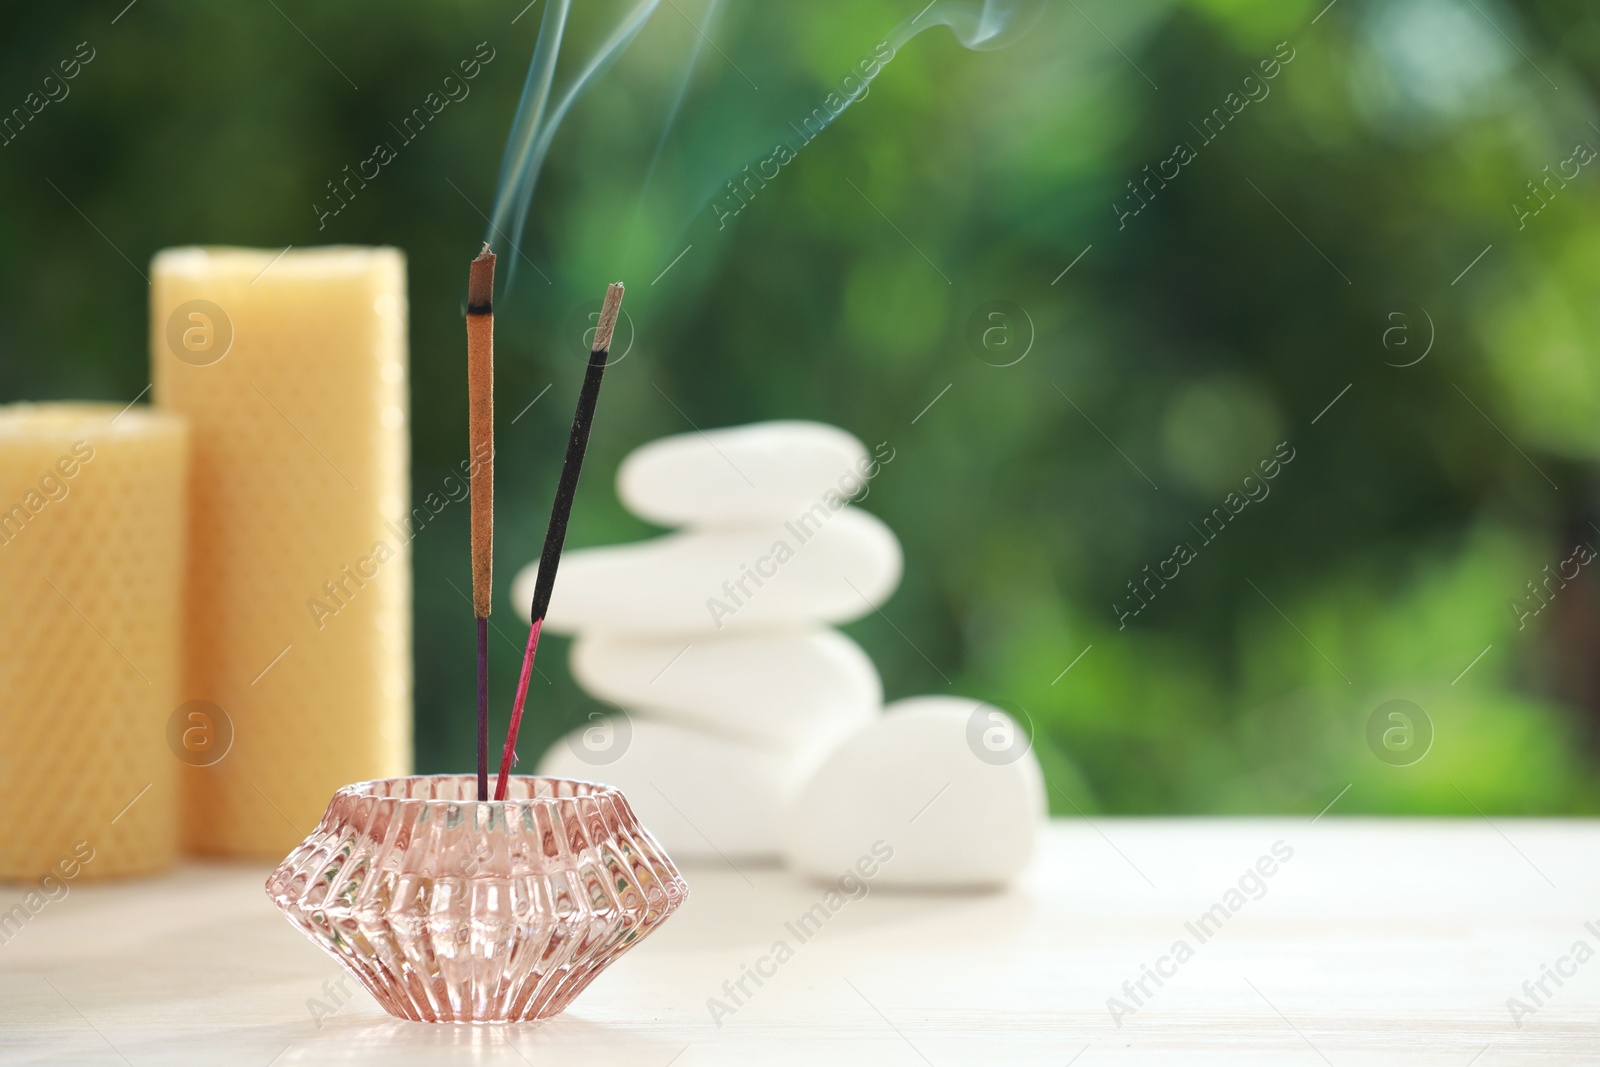 Photo of Incense sticks smoldering in holder near stones and candles on wooden table outdoors, space for text